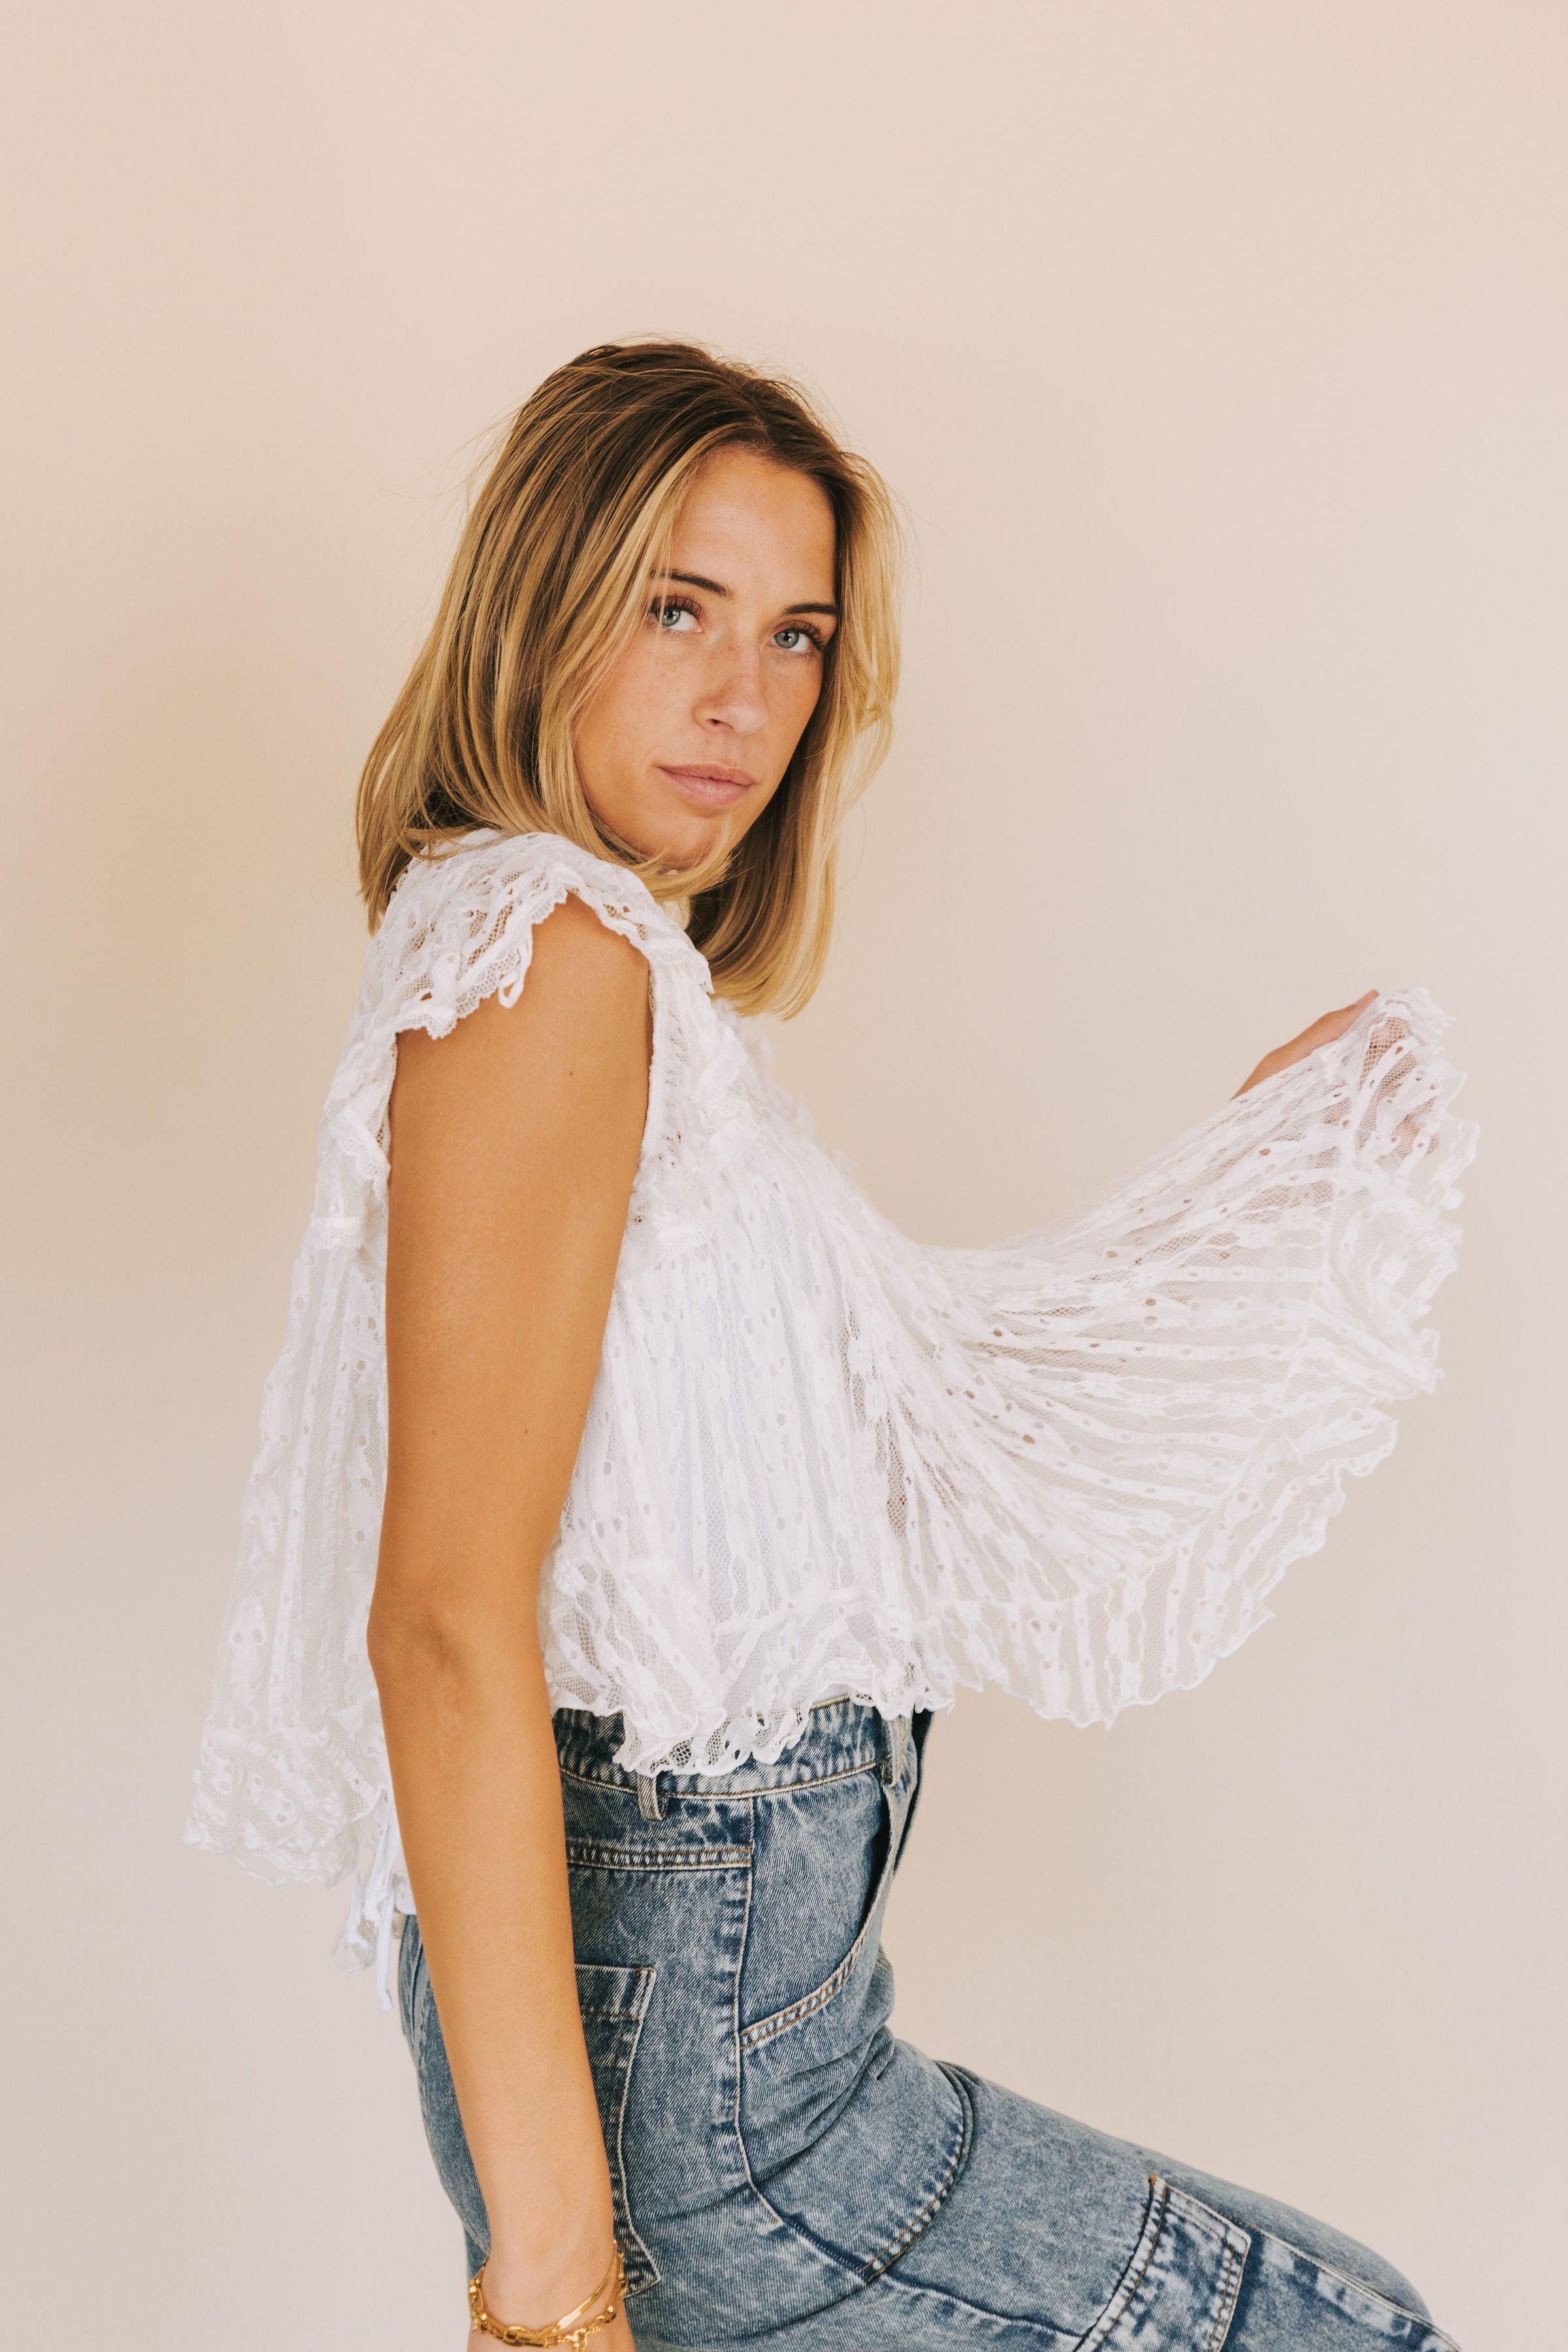 FREE PEOPLE - Lucea Lace Top